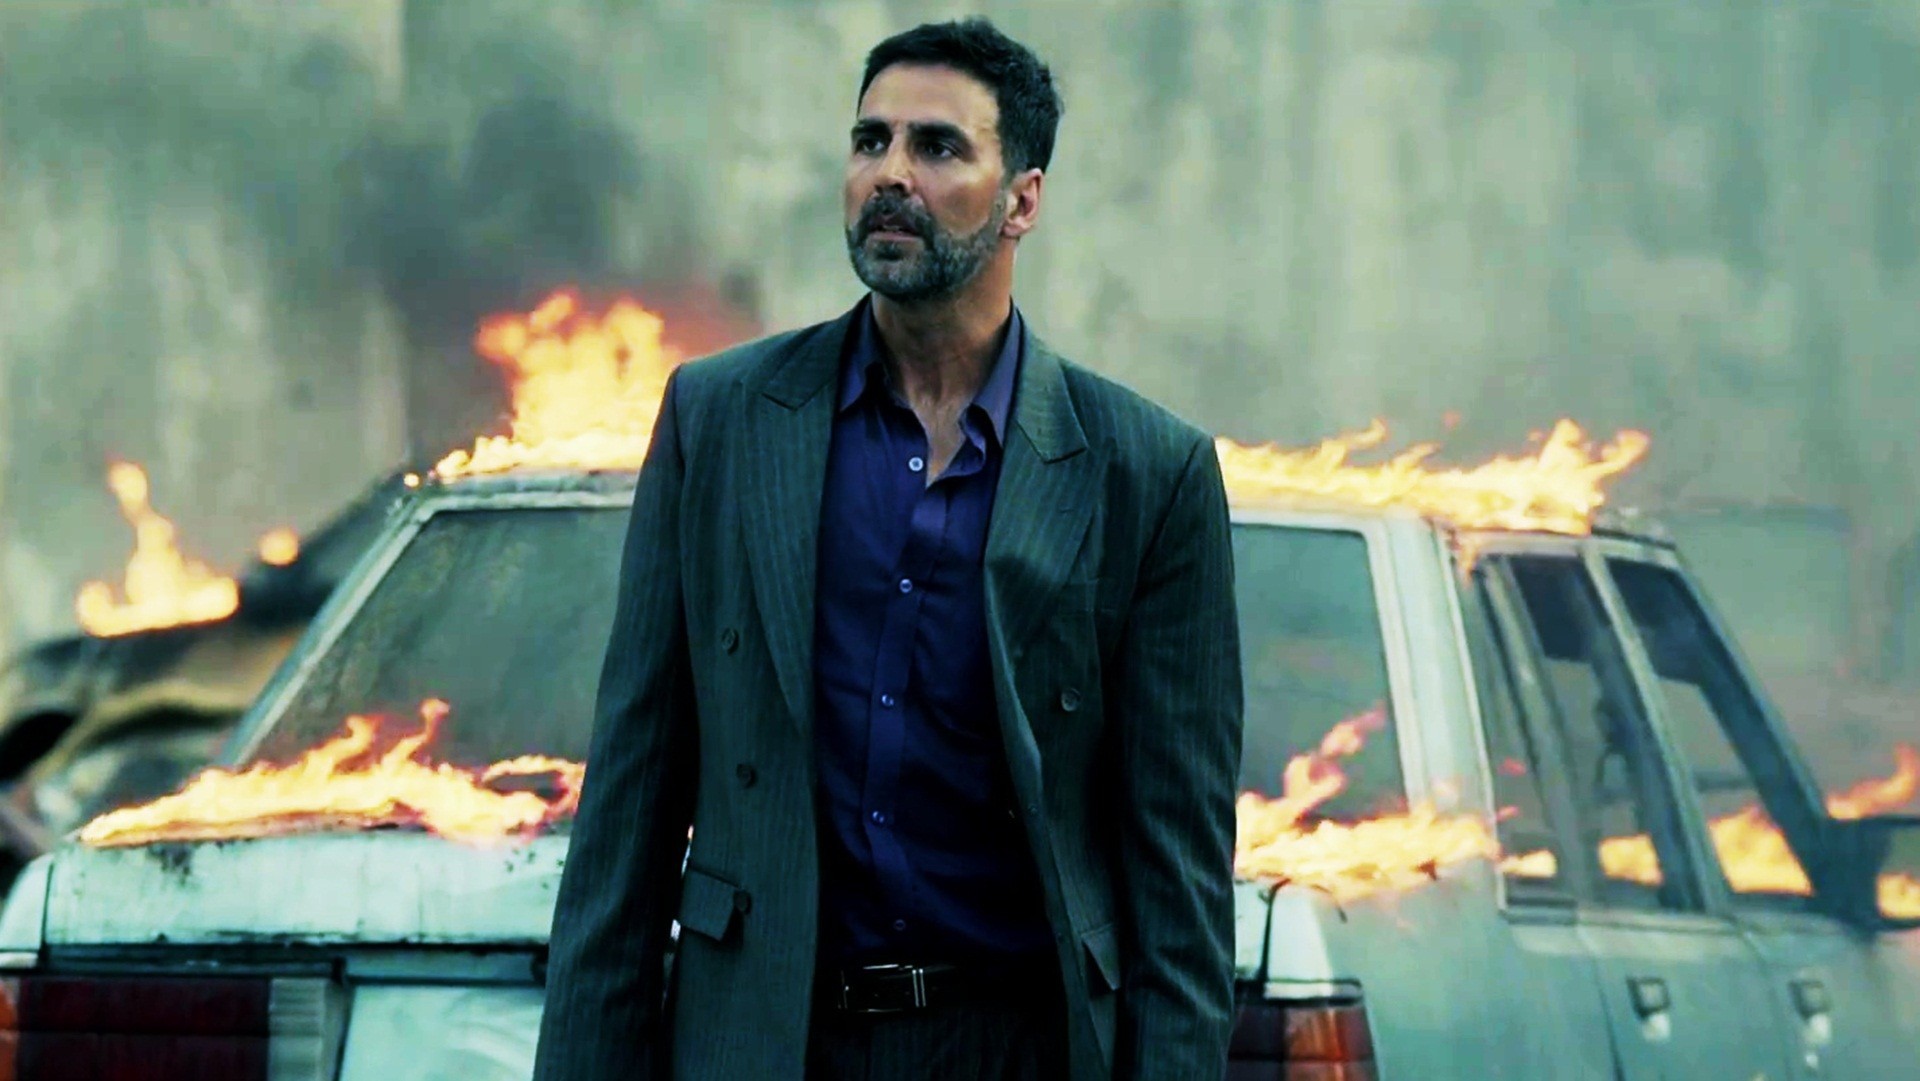 Akshay Kumar Airlift Movie Free Awesome Image For Mobile